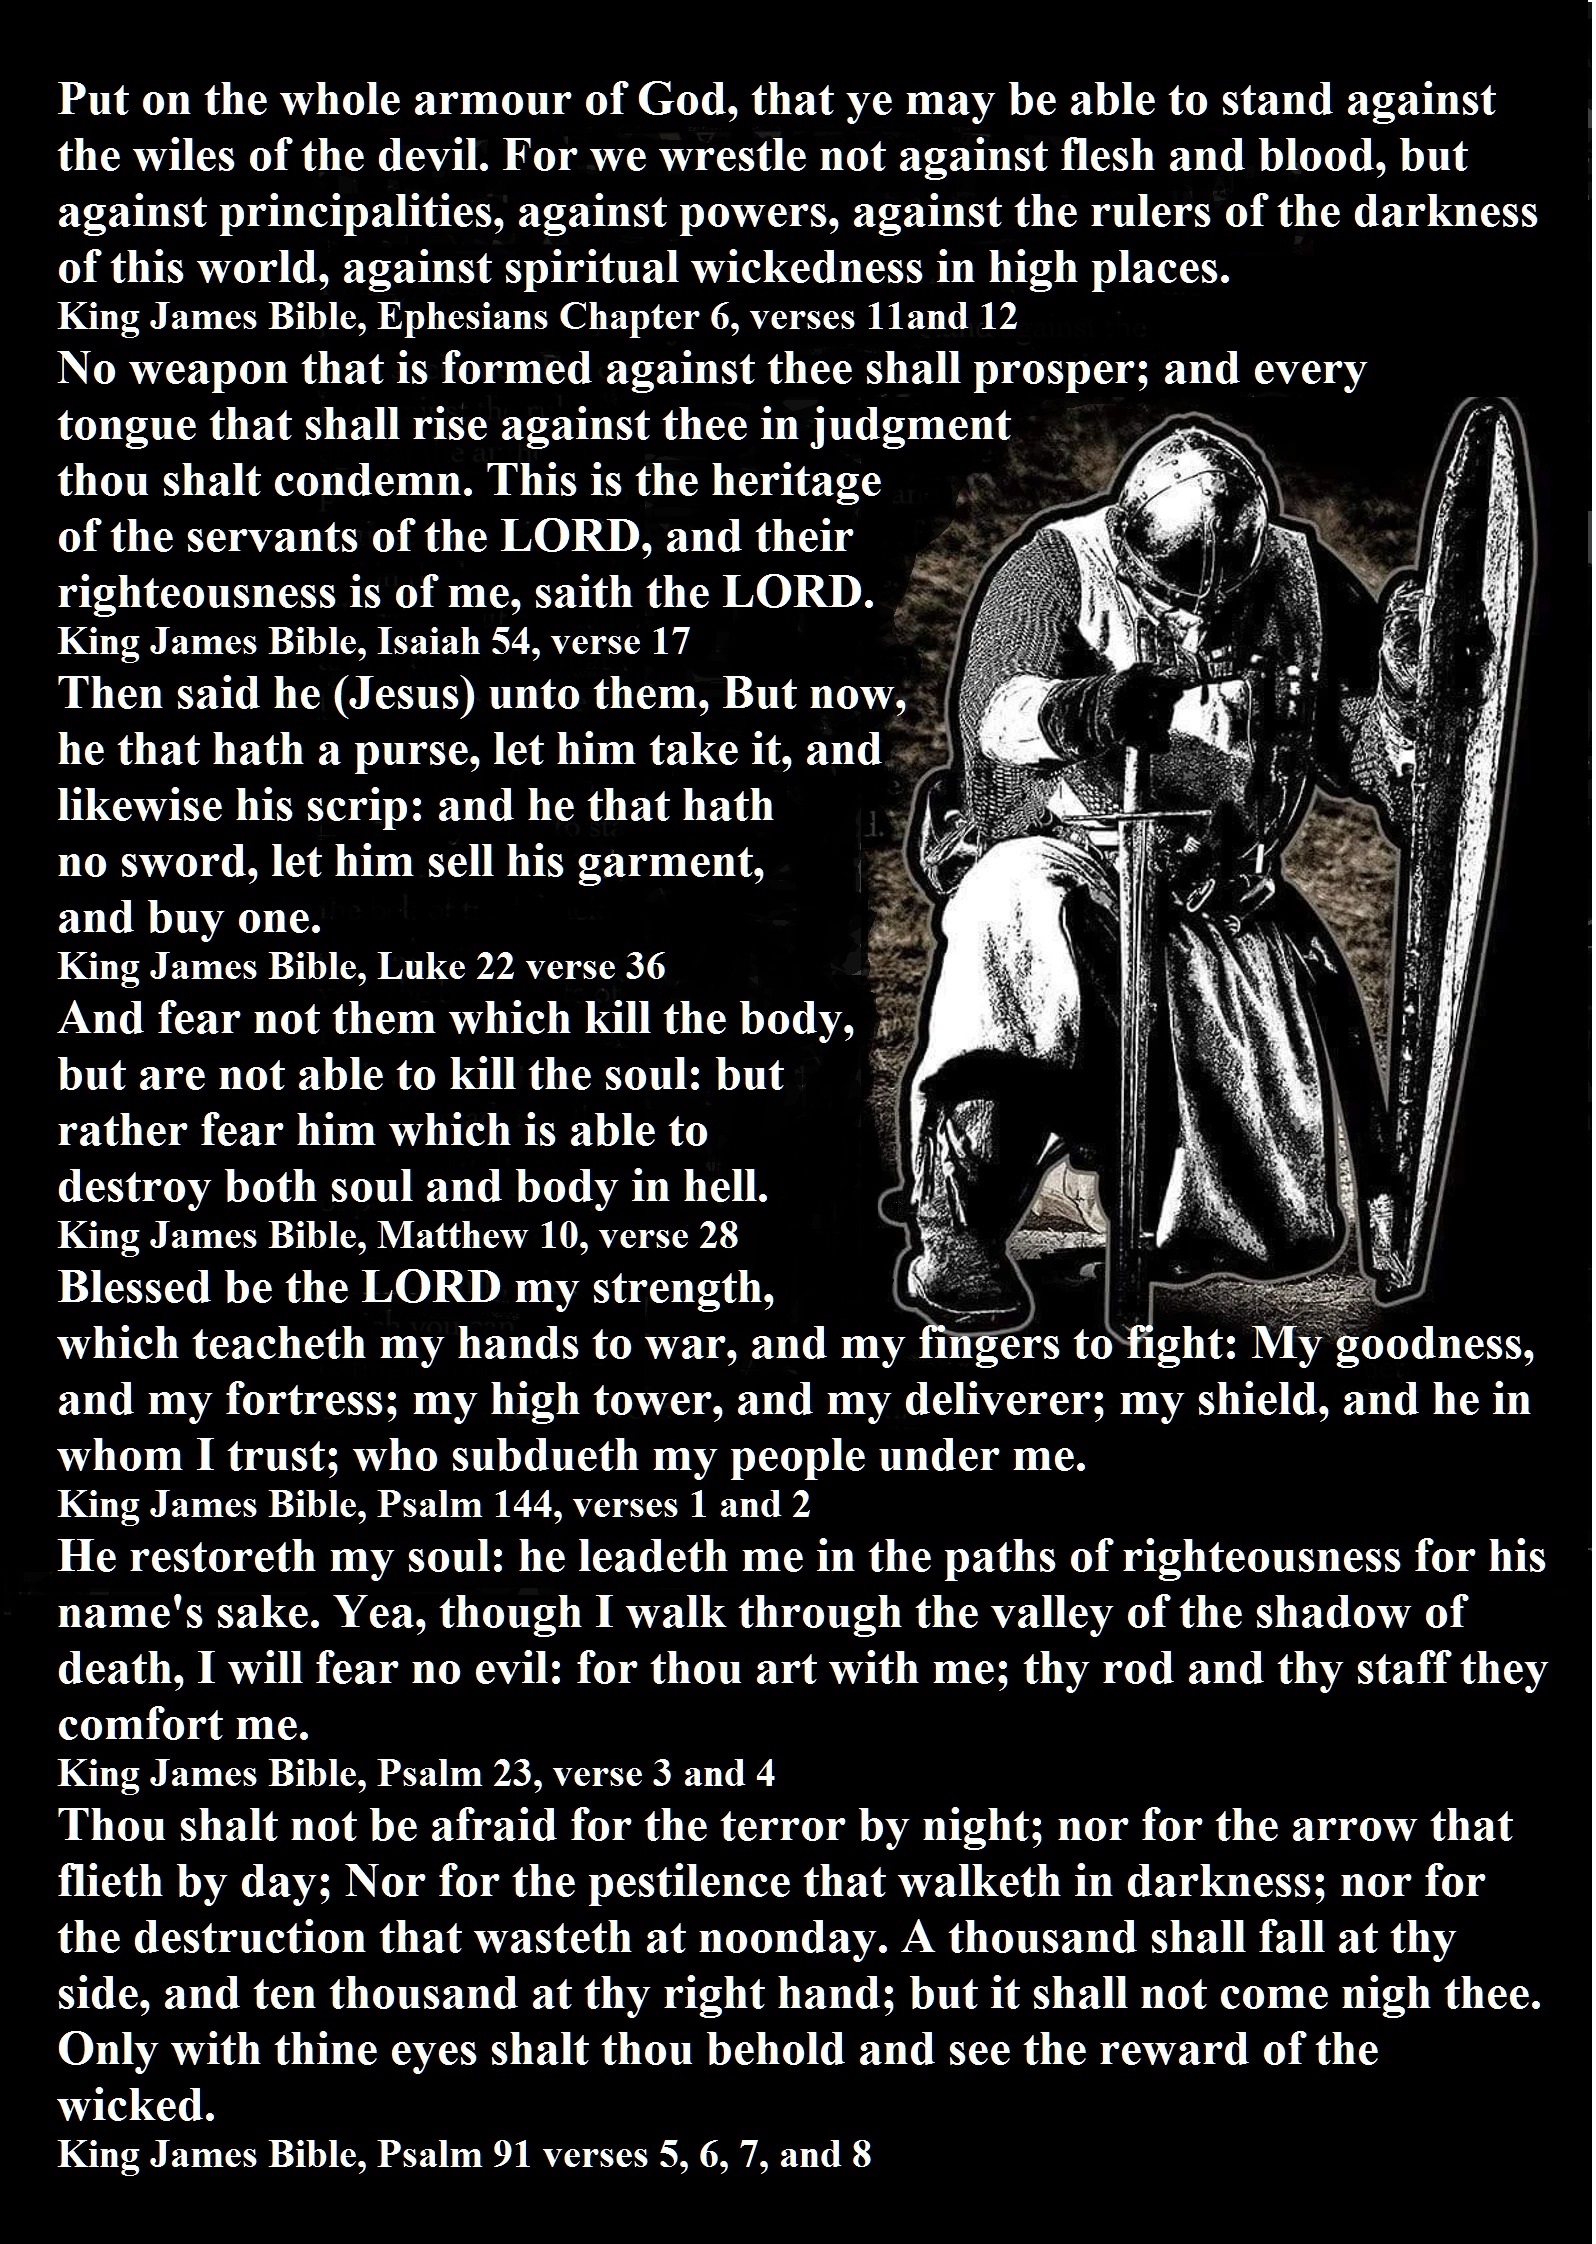 texas militia photo of bible quotes related to the armor of god